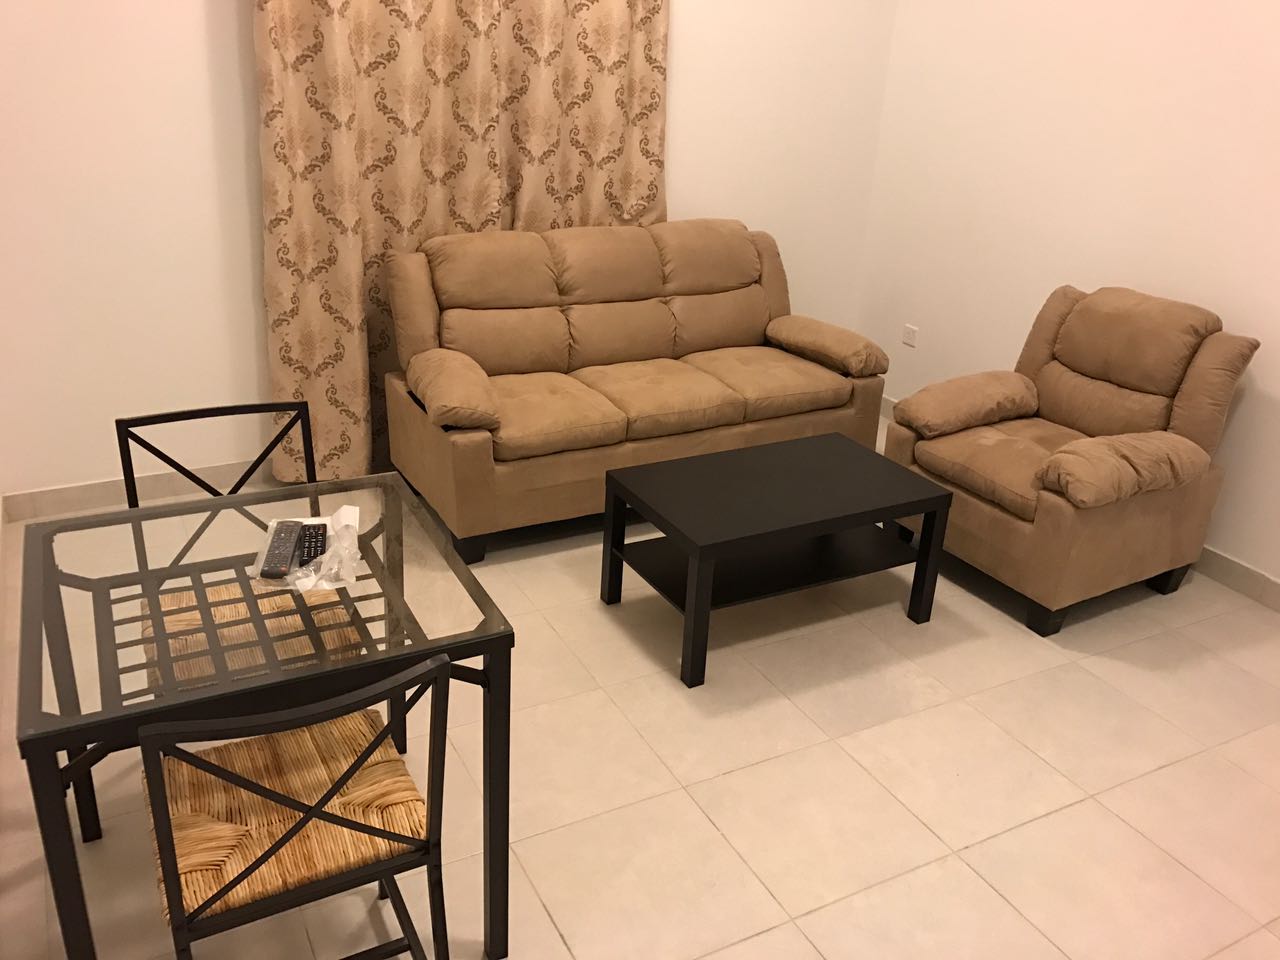 1 Bedroom Compound Apartment Furnished in Al Khessa SHC1